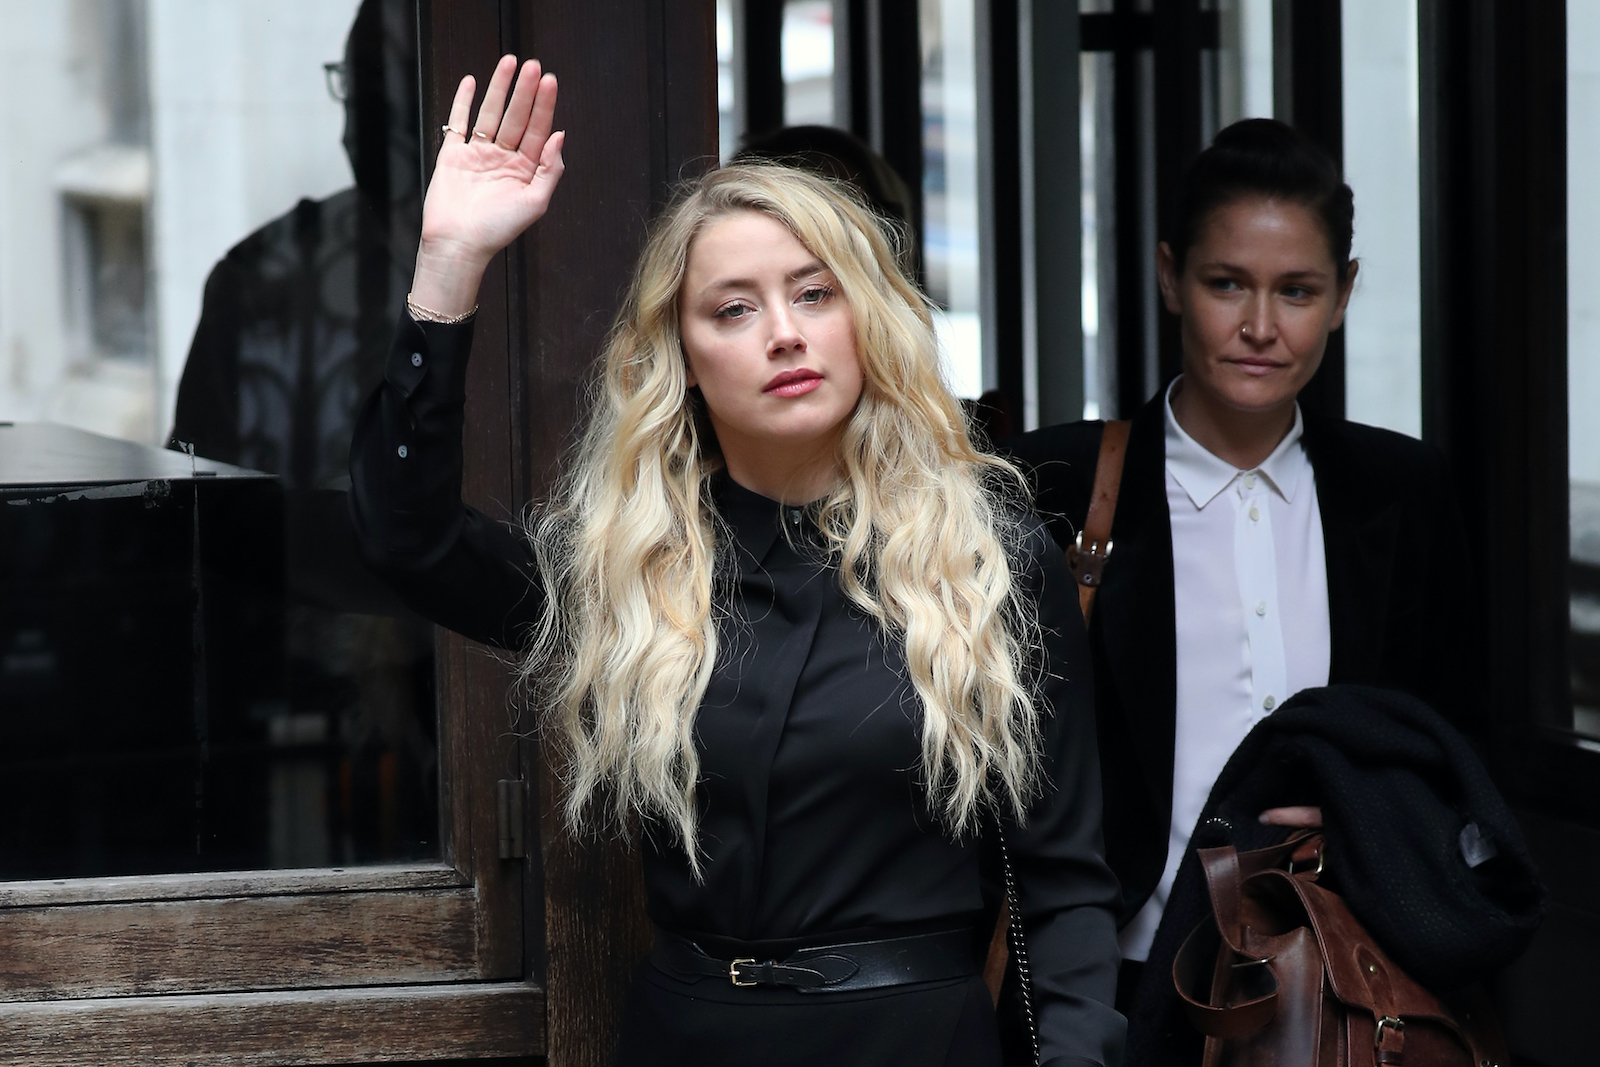 Amber Heard waves at fans outside a London courtroom 